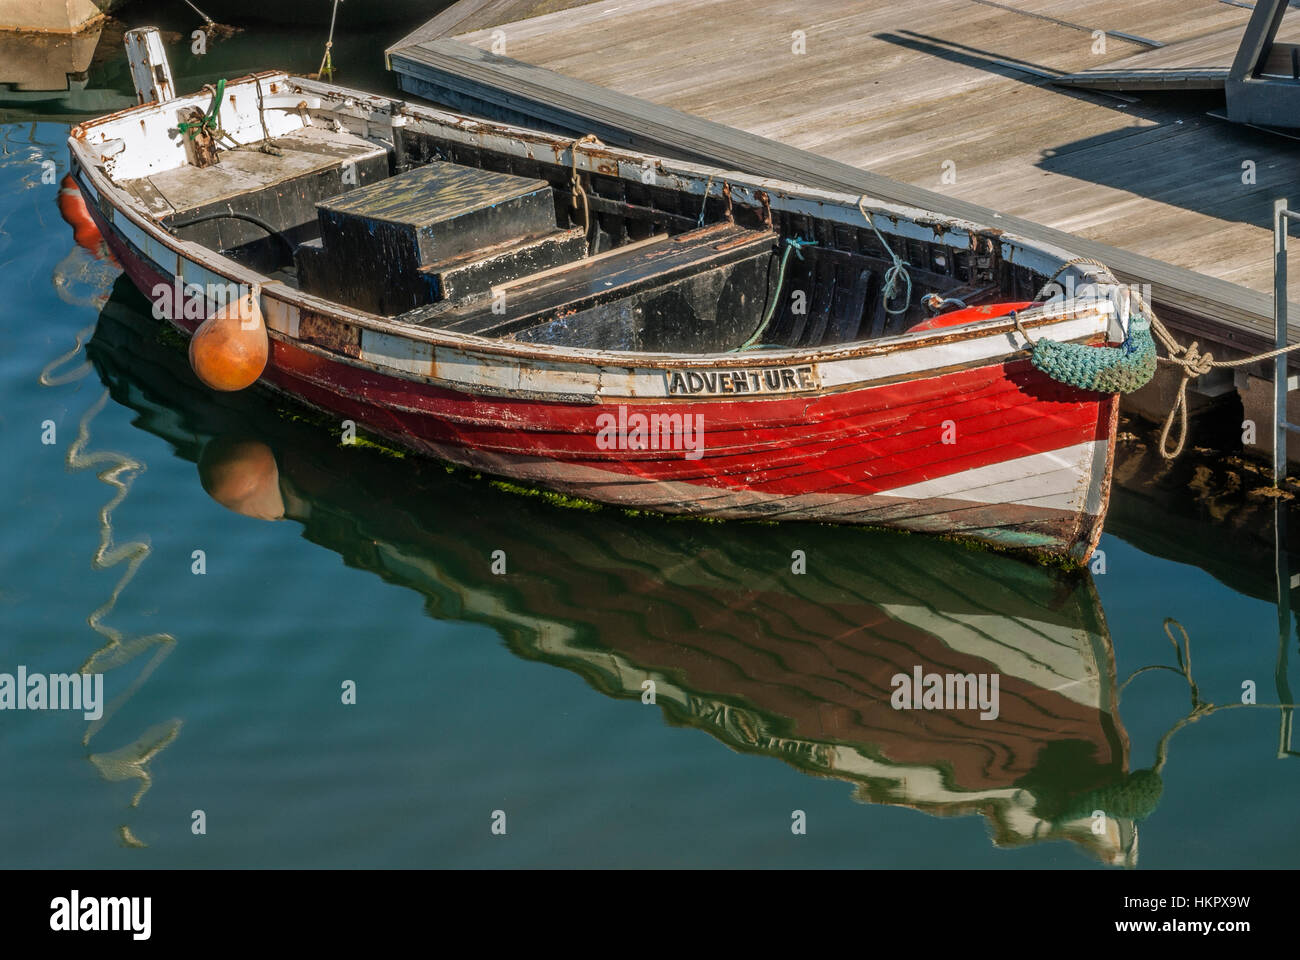 Small red Fishing Boat, named 'Adventure' in the Harbour of Scarborough on the North Sea coast of North Yorkshire, England Stock Photo